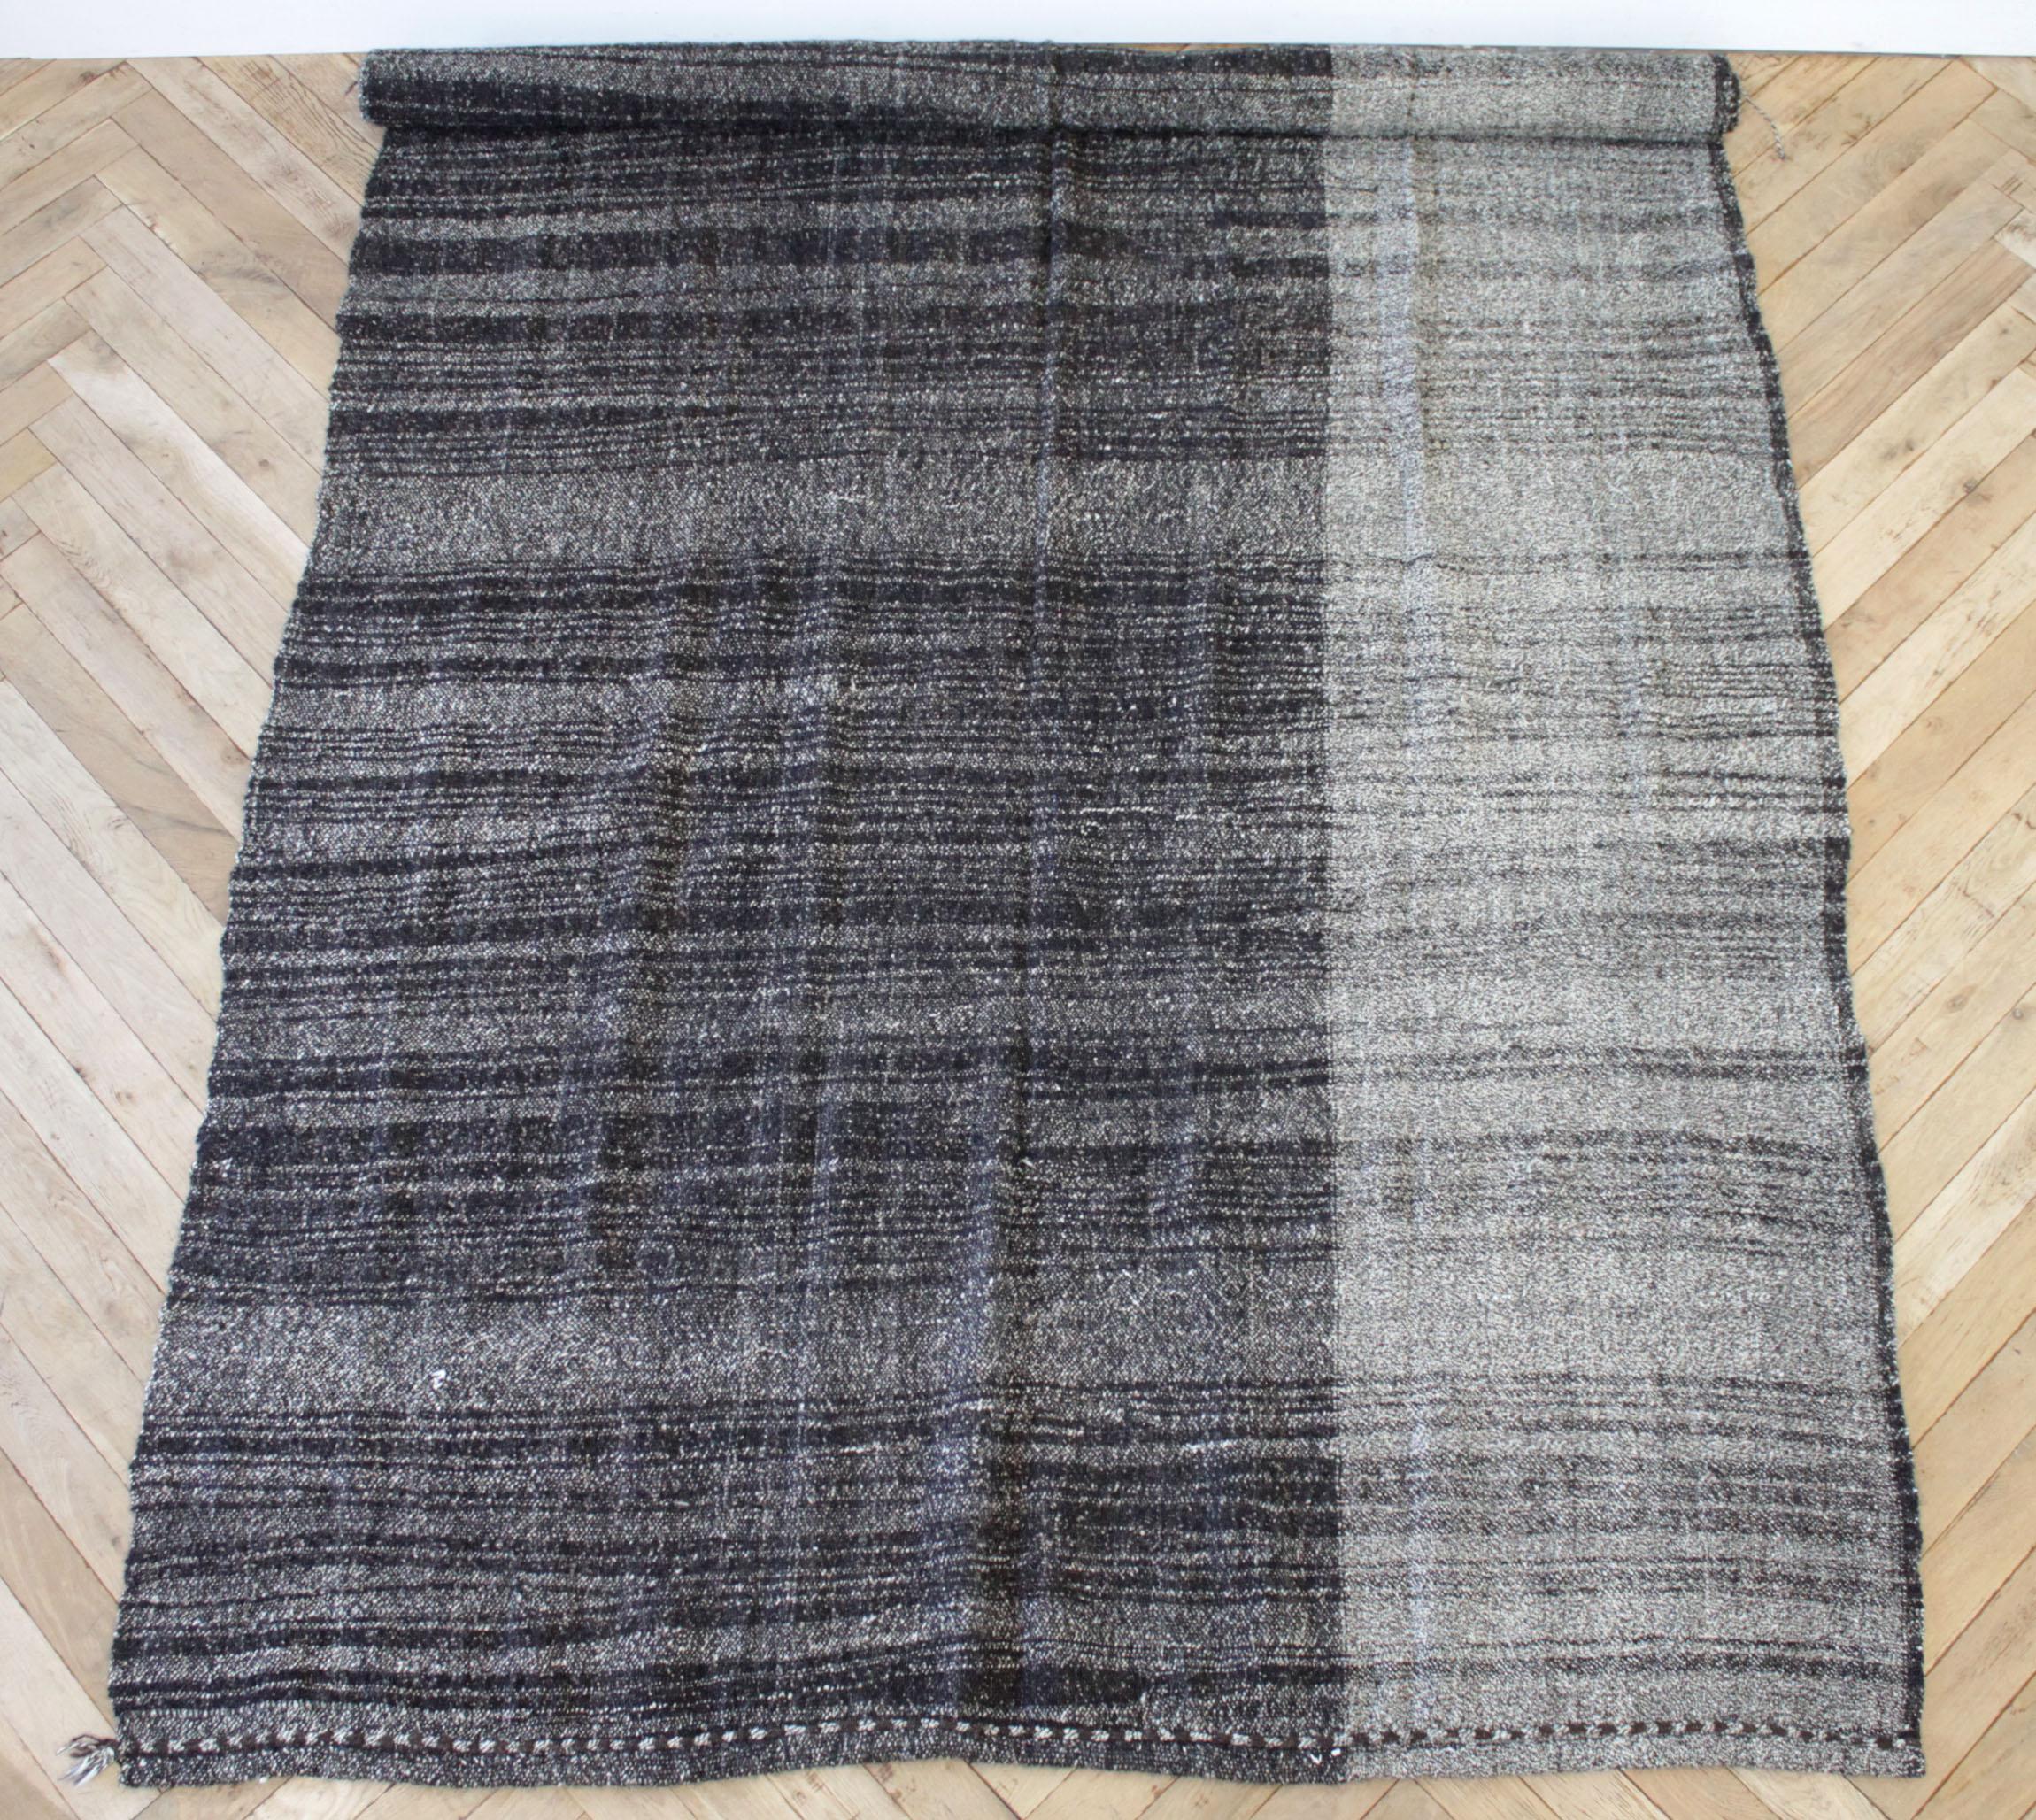 20th Century Vintage Turkish Flat-Weave Rug in Brown and Gray with Stripe